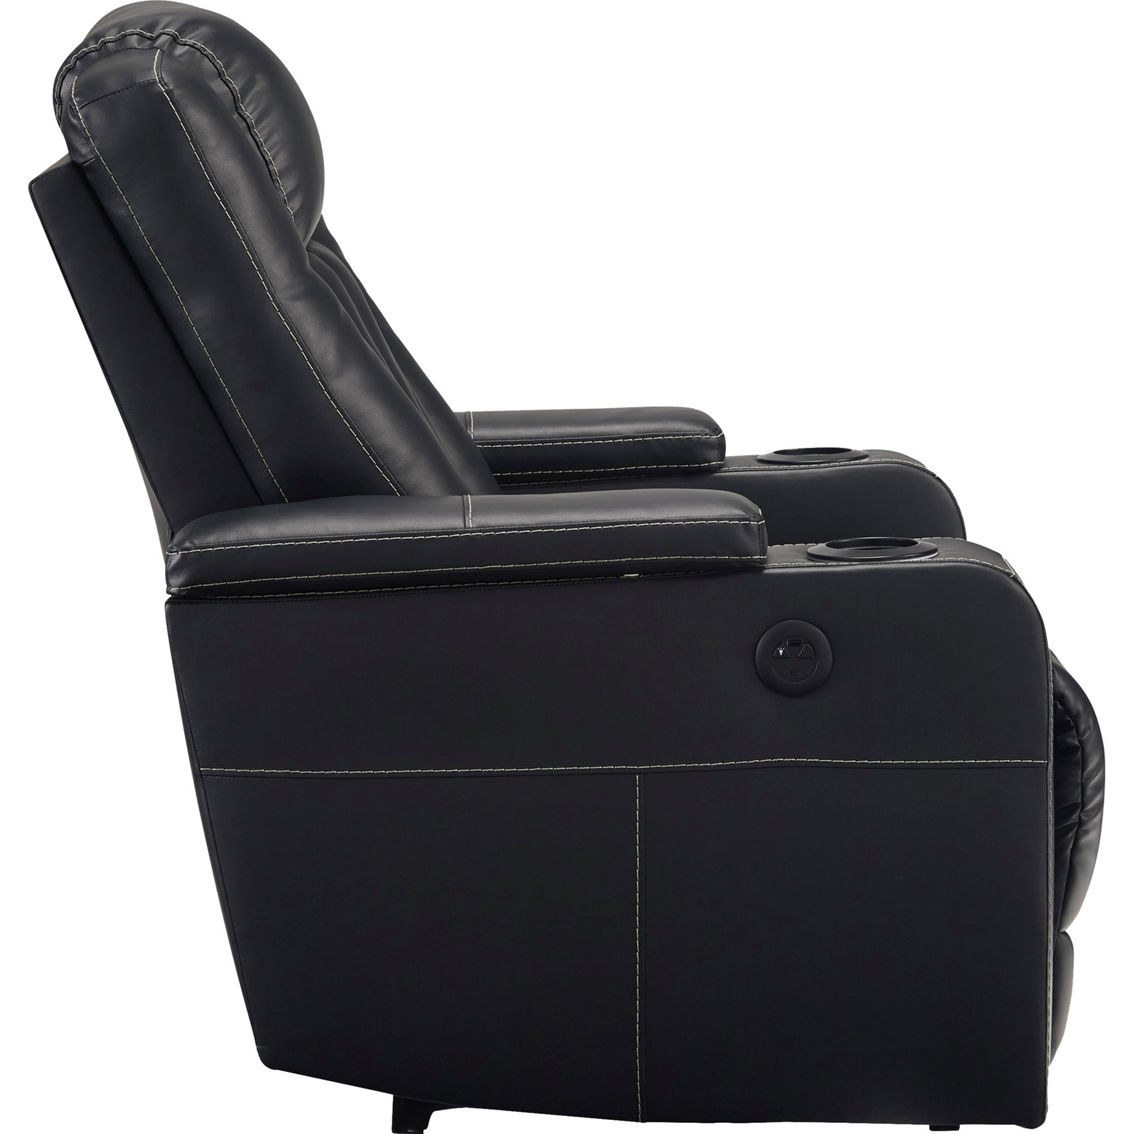 Signature Design by Ashley Center Point Recliner - Image 4 of 10